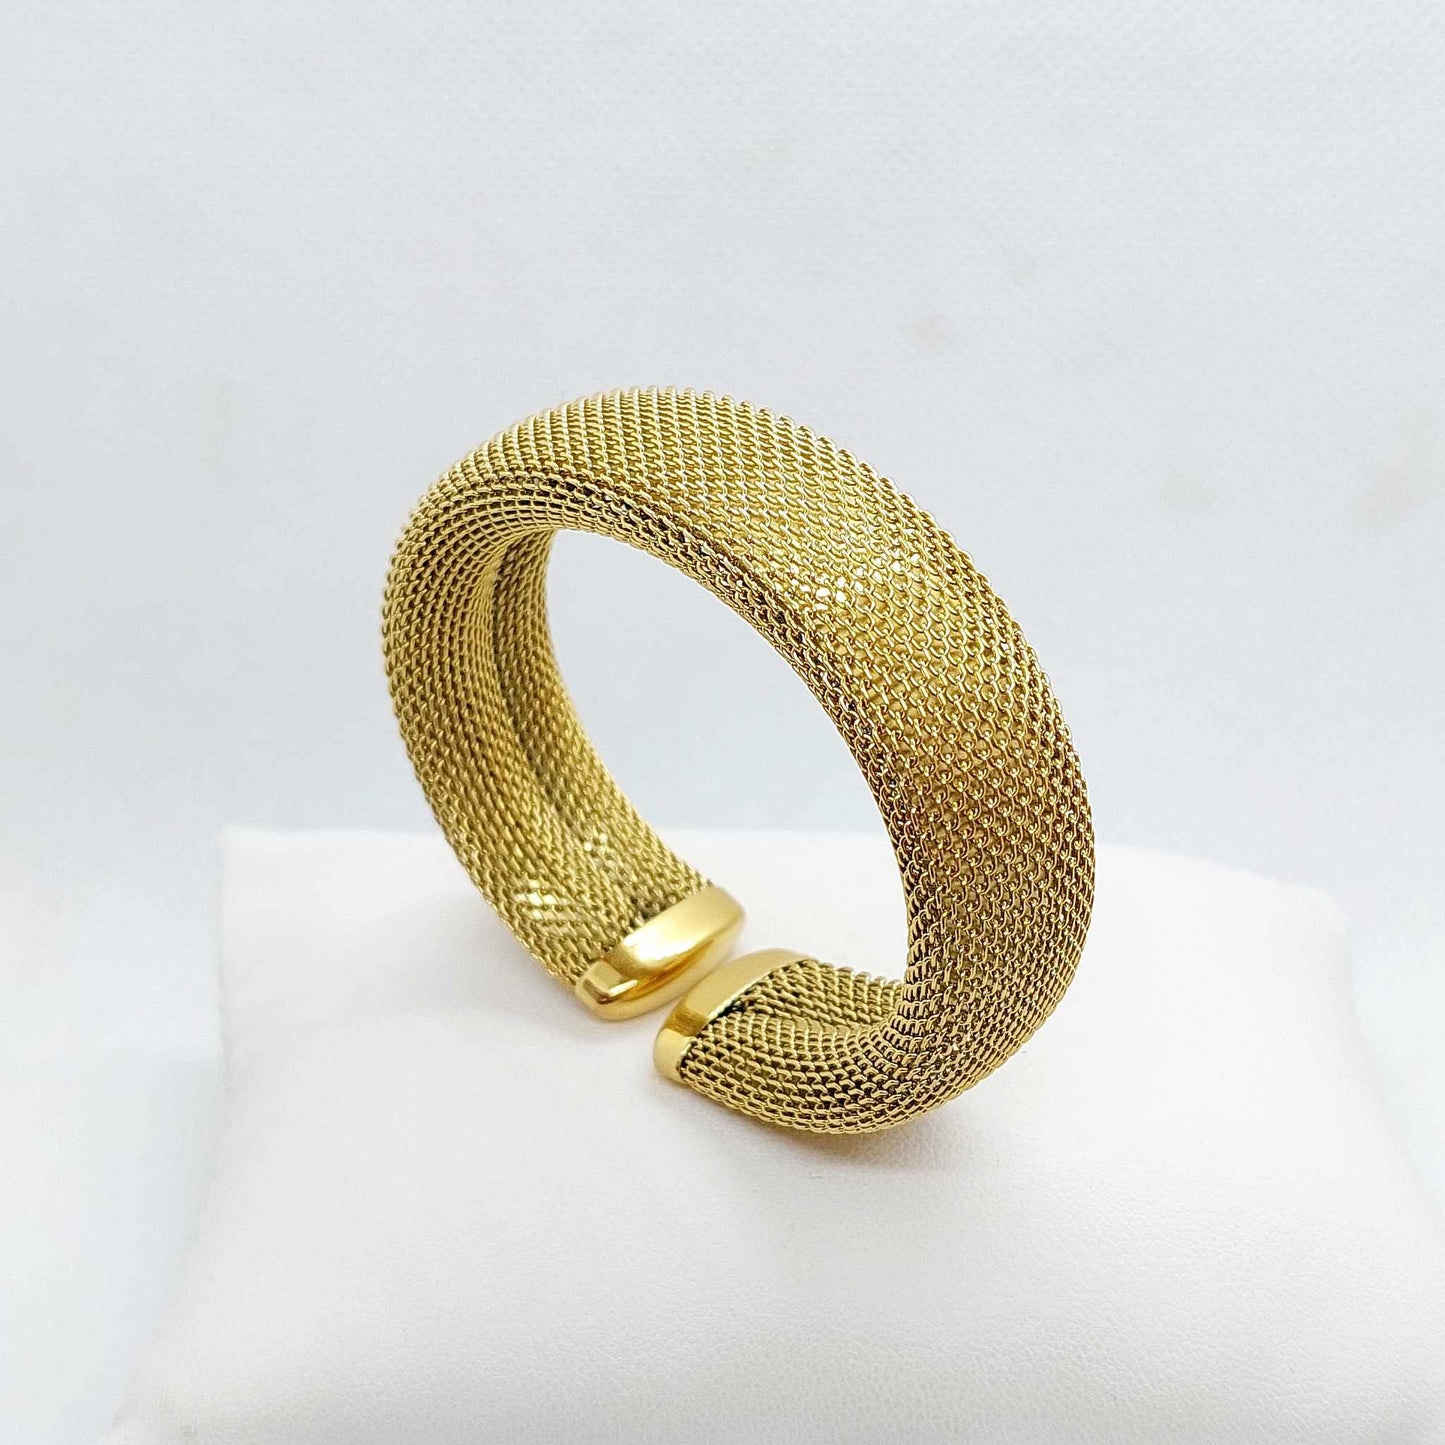 Vintage Cuff Bangle Bracelet in Gold Plated Stainless Steel